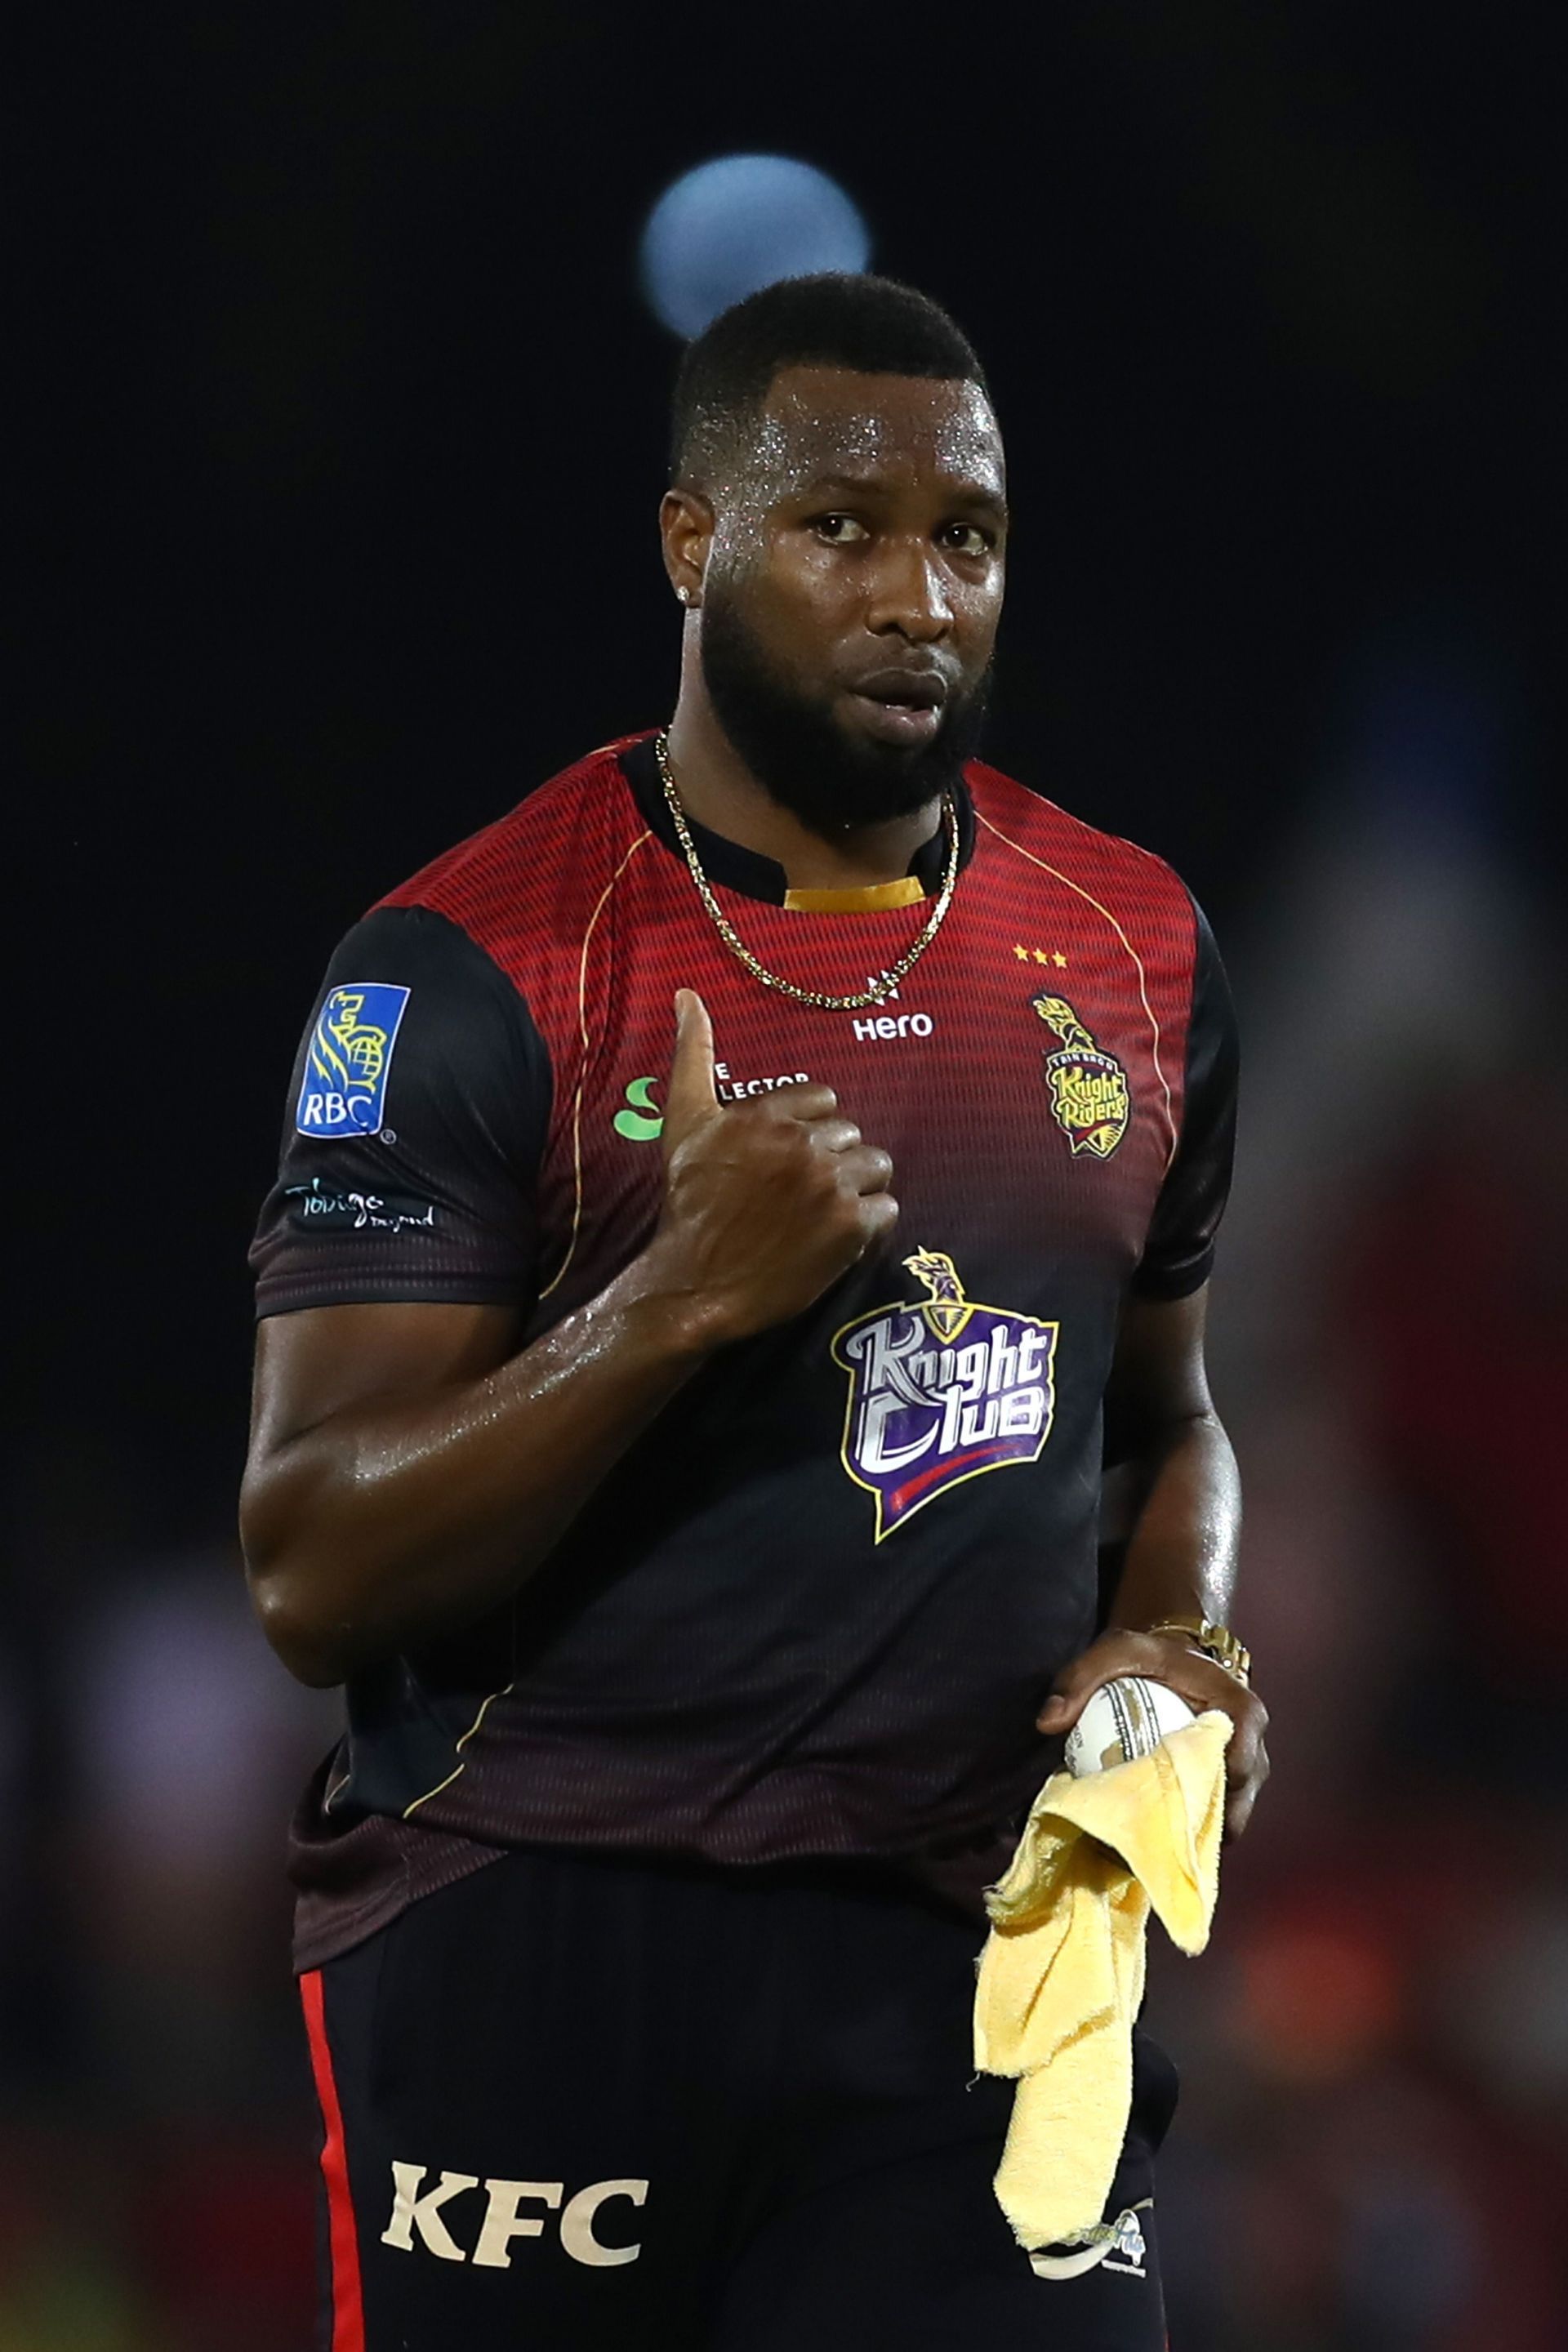 Pollard has proved his mettle in major T20 leagues of the world (P/C: iplt20.com)